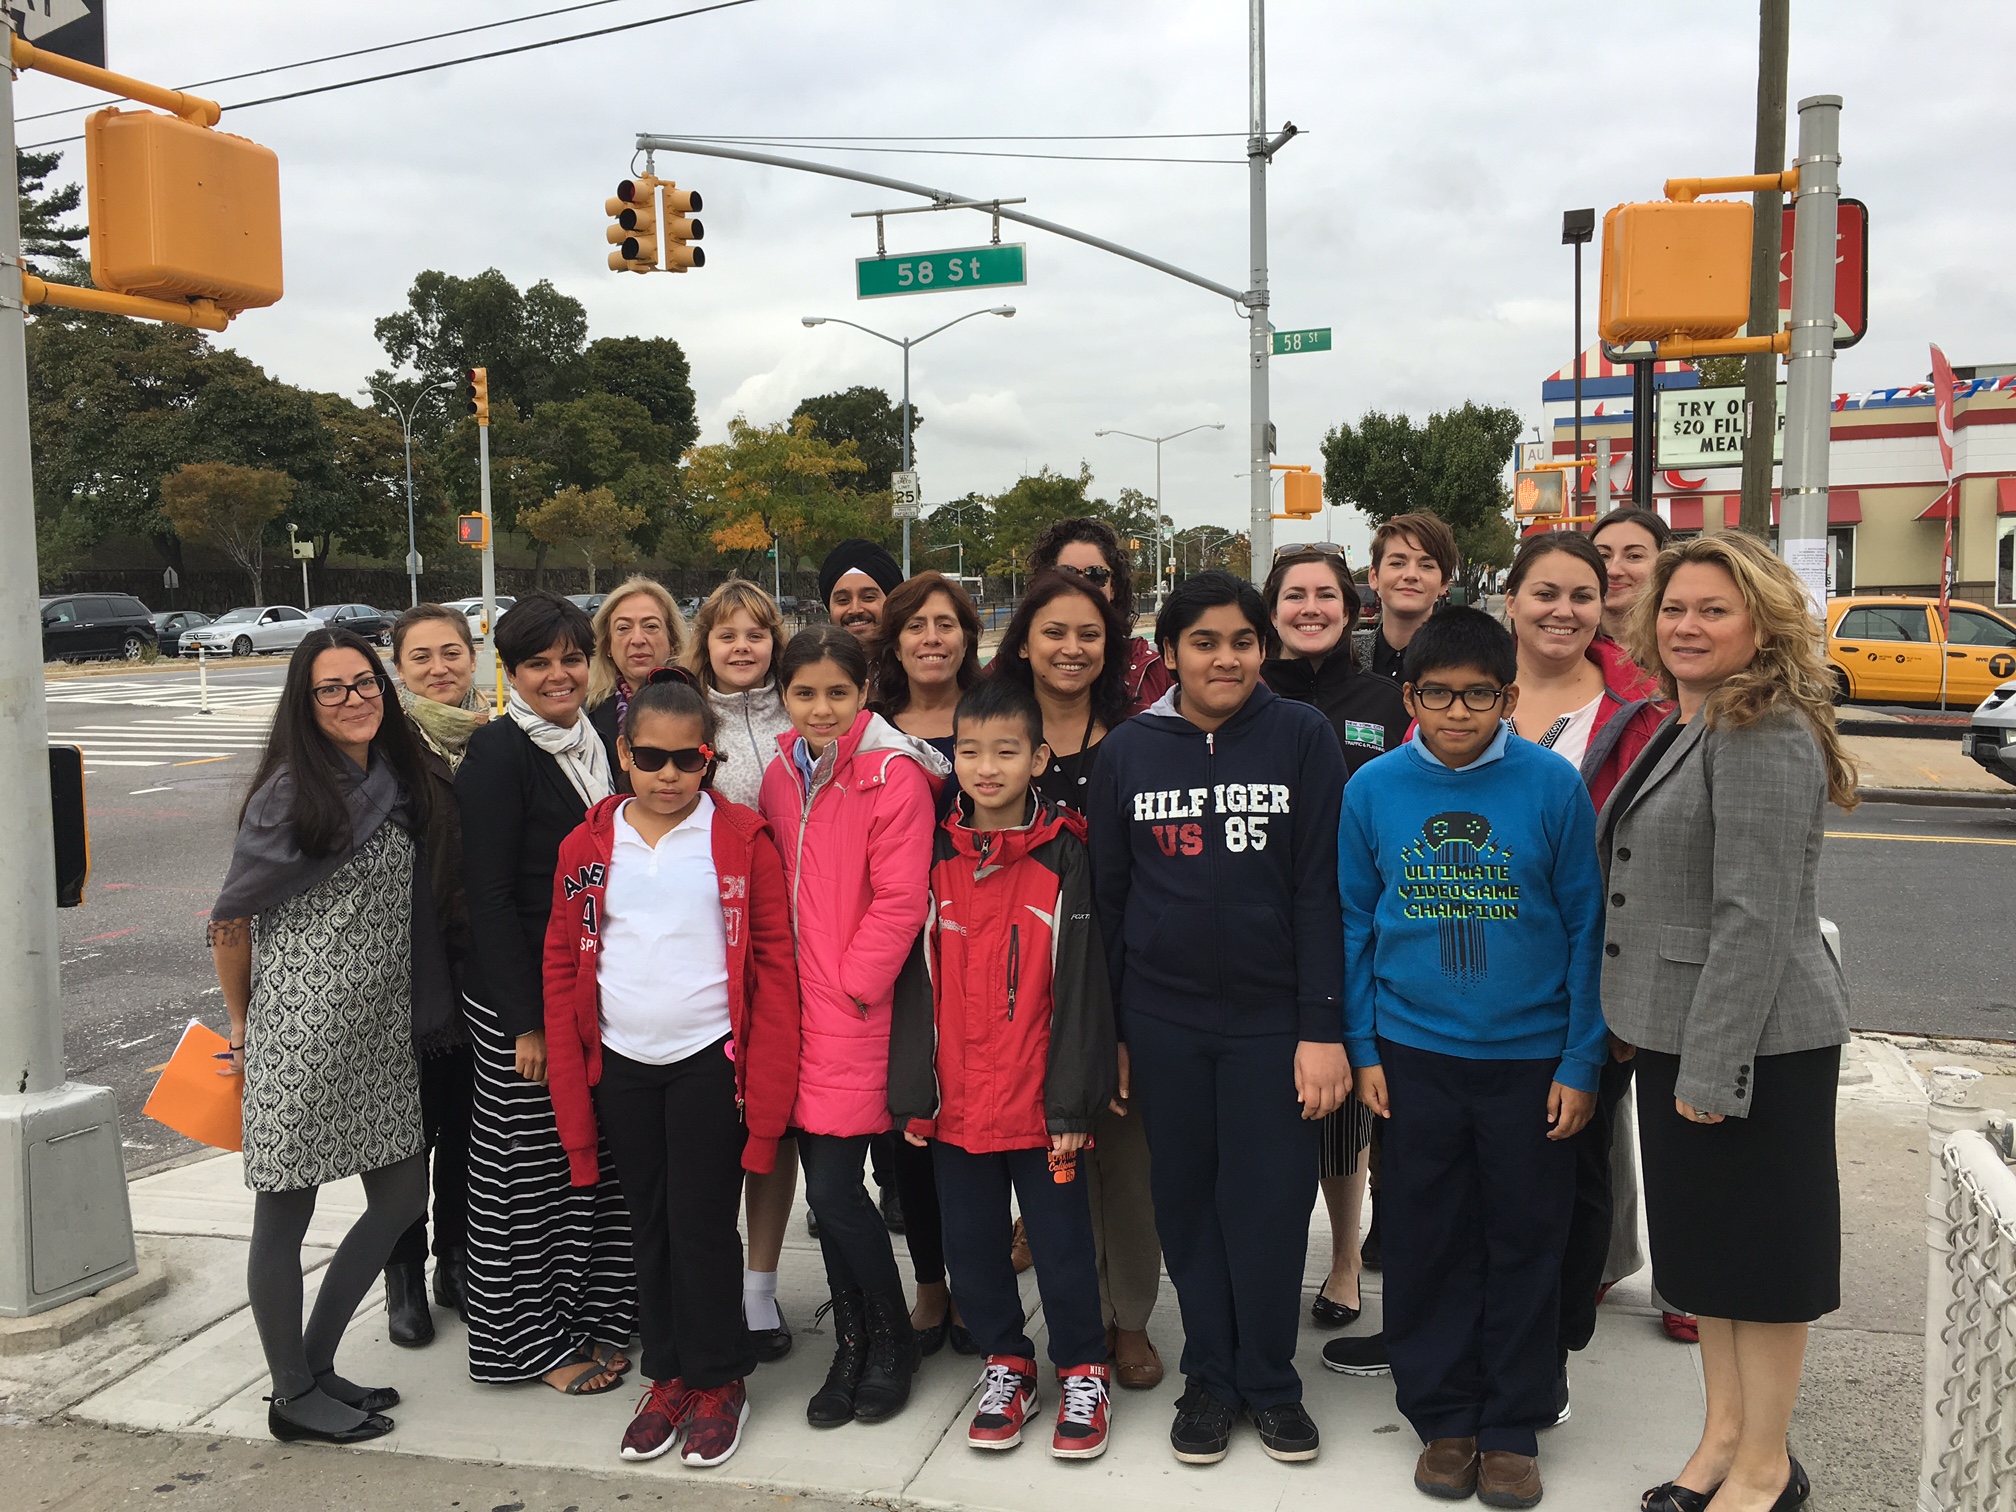 DOT officials and students of PS 11 in Woodside, Queens celebrate International Walk to School Day